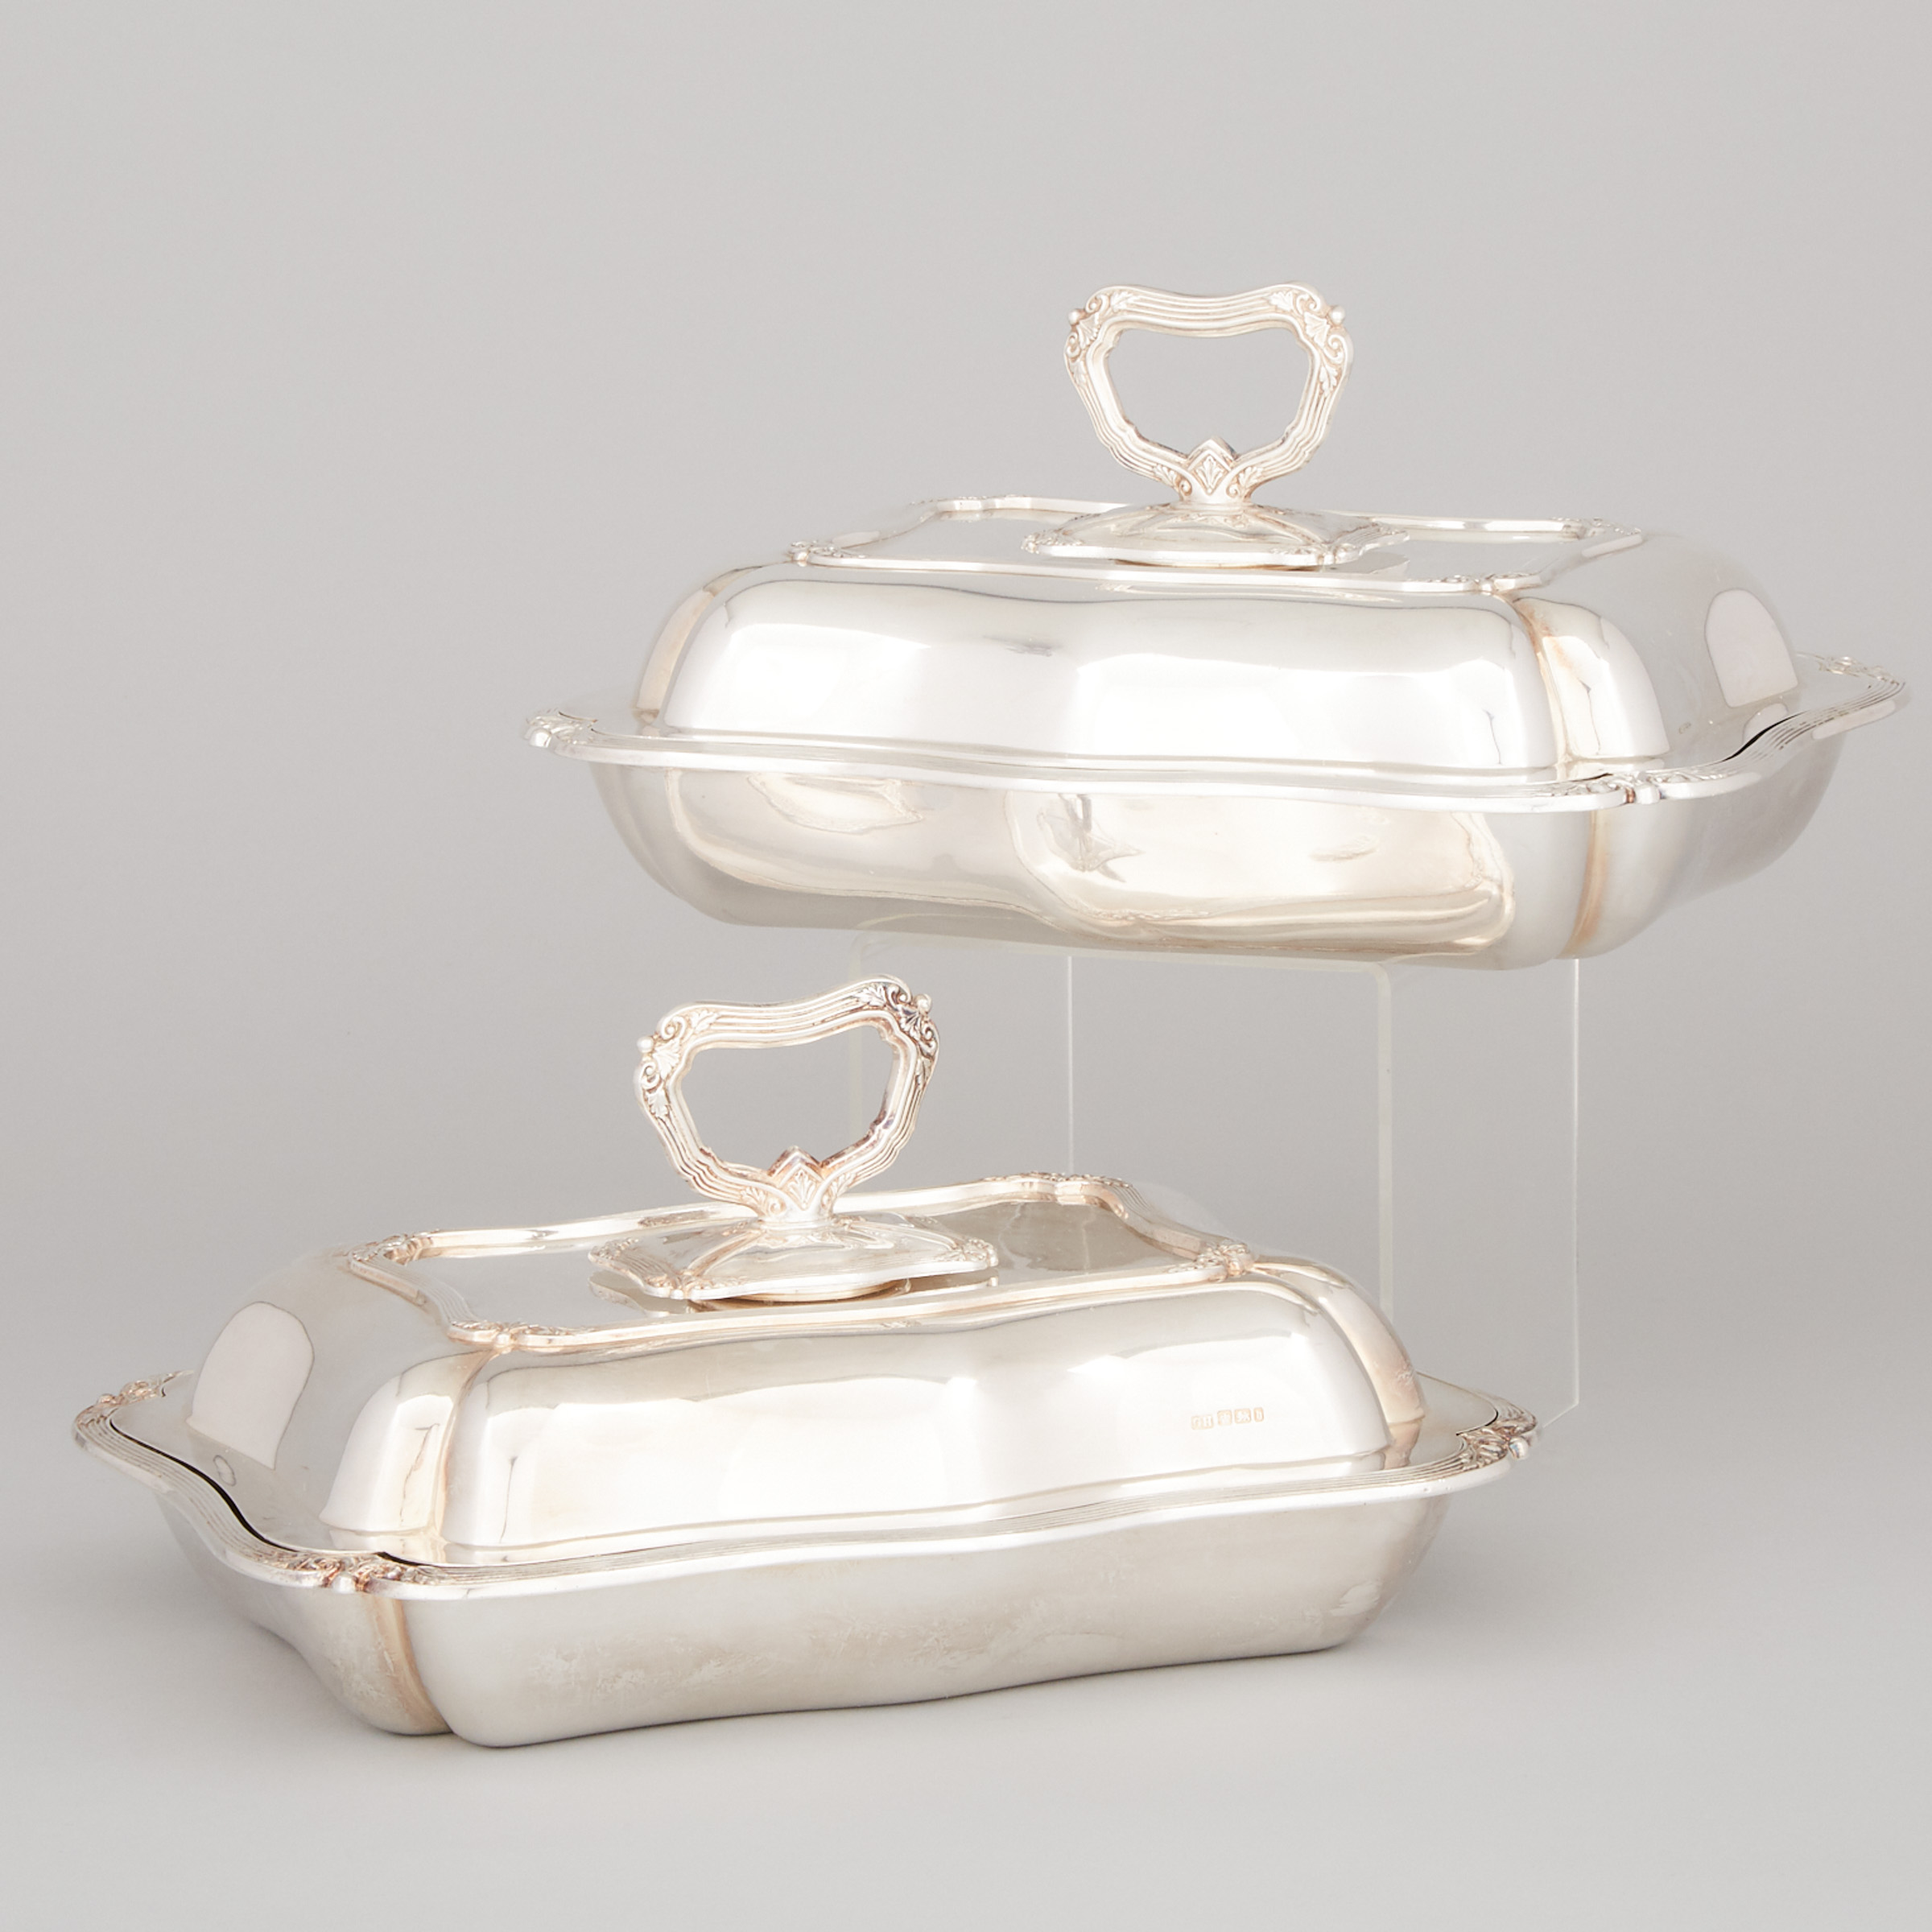 Pair of Late Victorian Silver Covered Entrée Dishes, Harrison Brothers & Howson, Sheffield, 1900